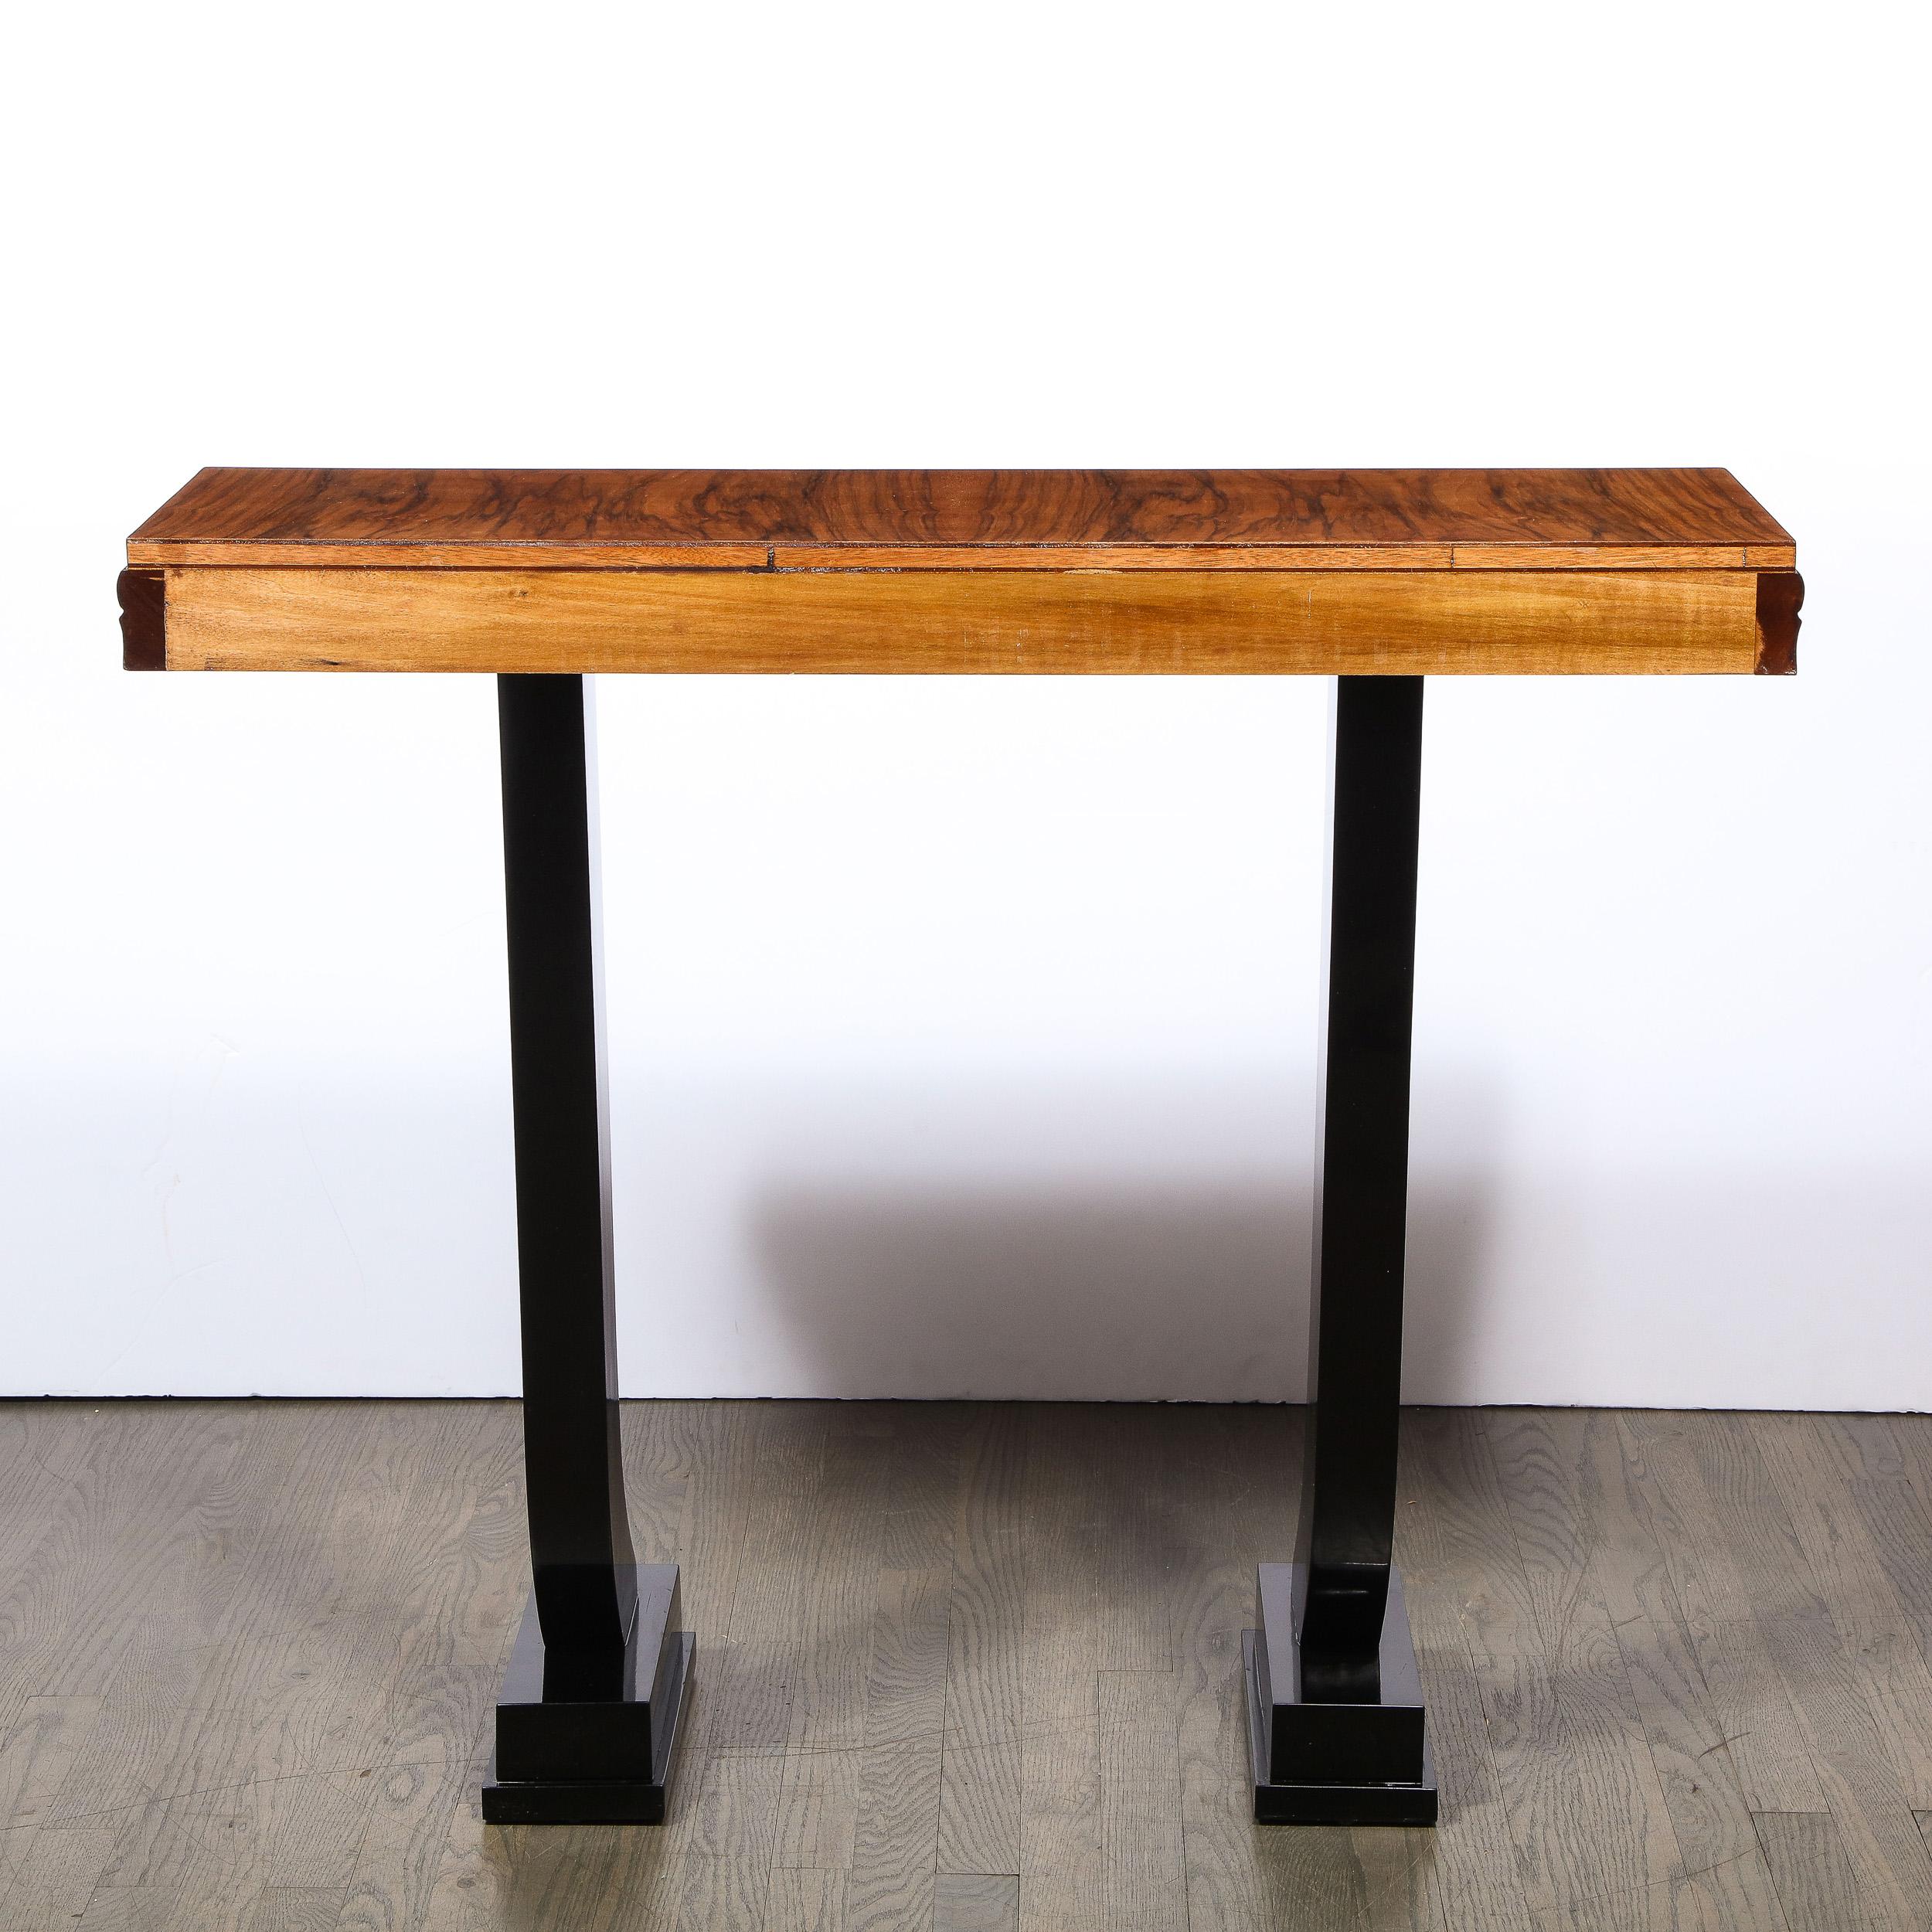 Mid-20th Century Art Deco Machine Age Bookmatched Walnut & Black Lacquer Console Table